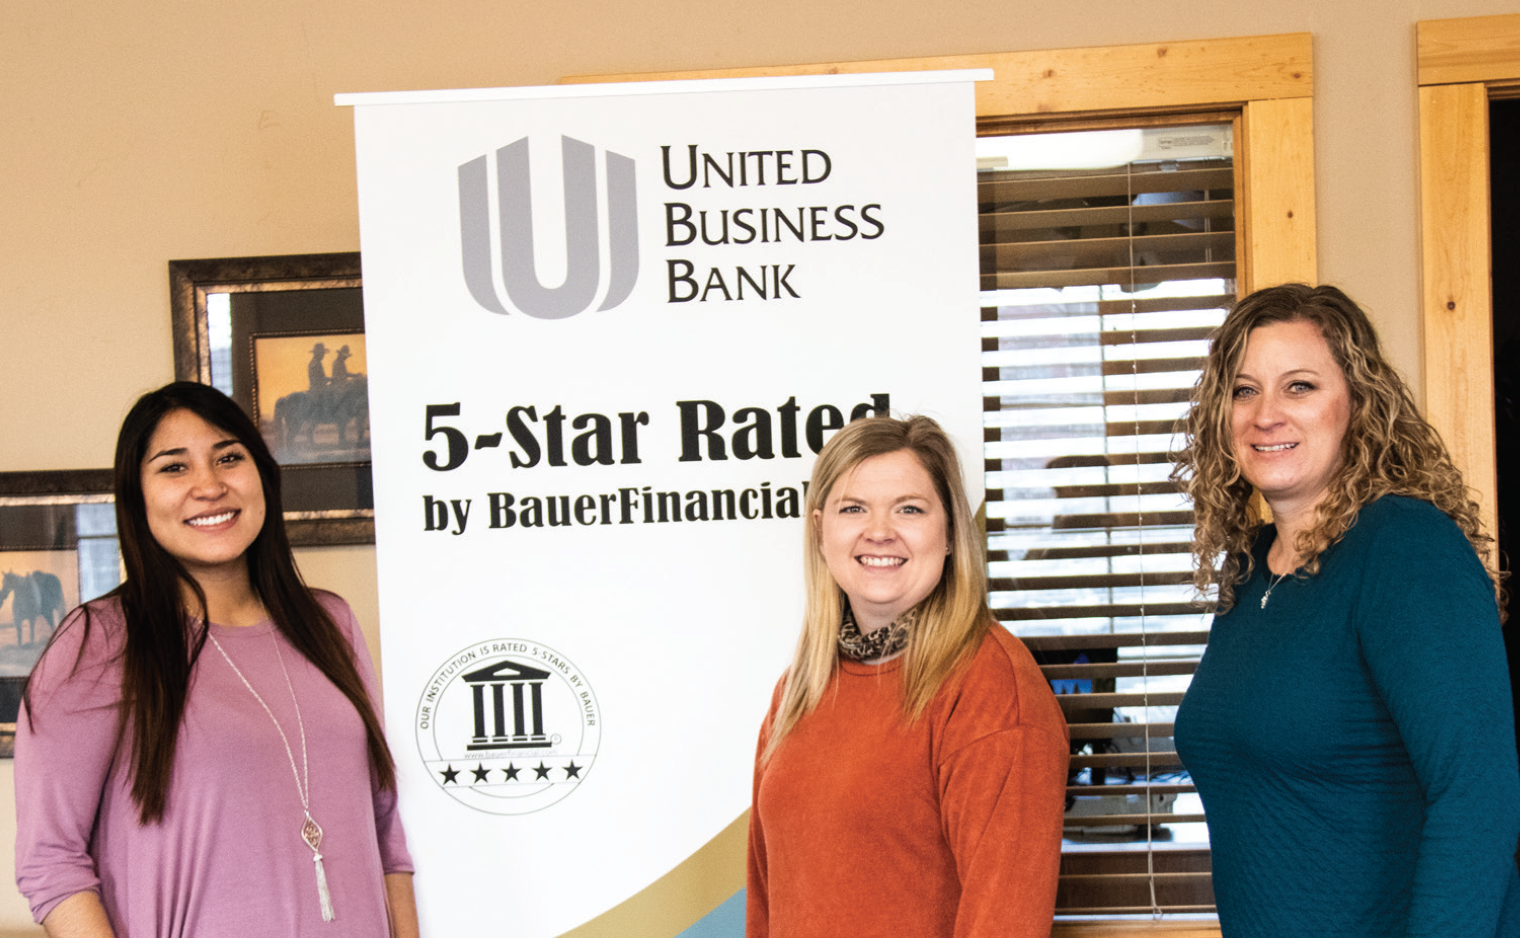 photo by Kim Cameron The United Business Bank in Kremmling (L to R) Marissa Cereceres, Cassidy Bradley and Alison Eisenman.